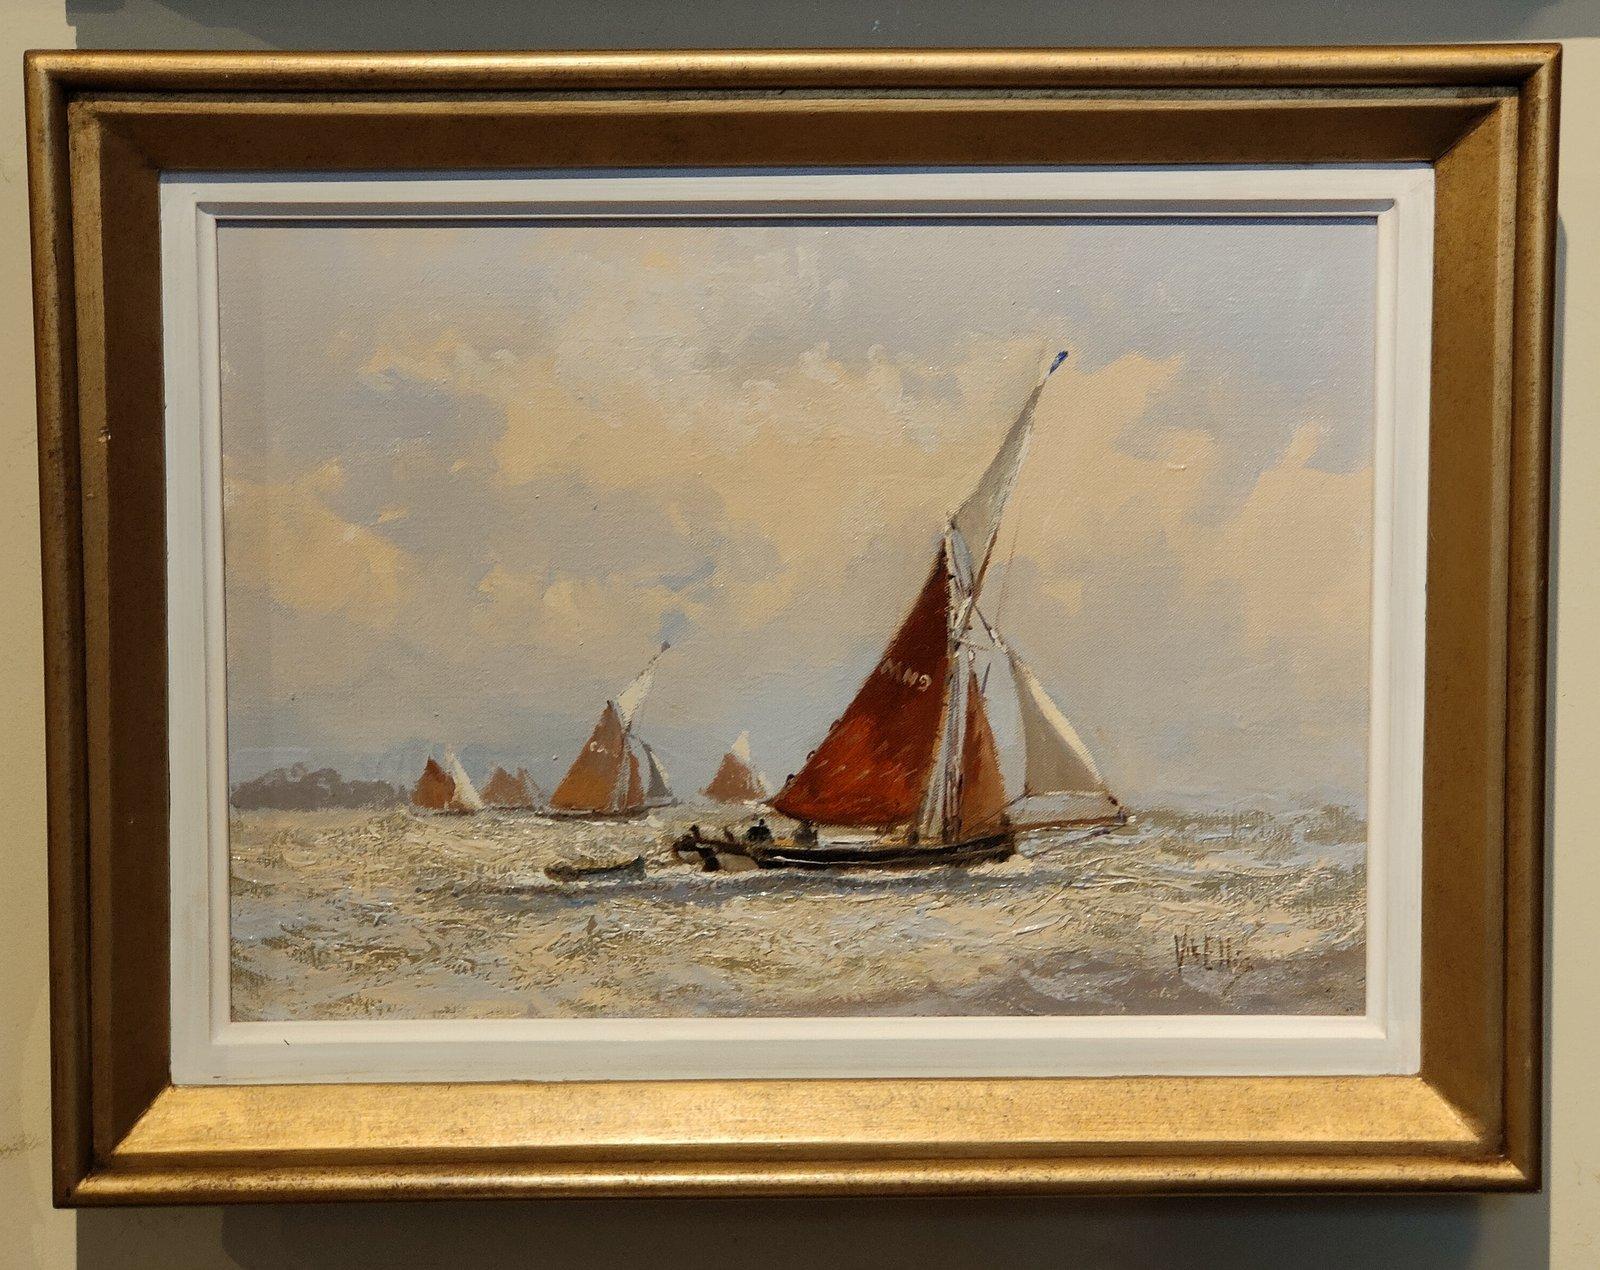 Oil Painting by Victor William Ellis "A Breezy day off the Coast"  Victor William Ellis DSM, RSMA 1921 -1984 . Marine painter of all types of ships past and present. mainly east coast and Thames near his native Canvey Island. Worked Atlantic conveys